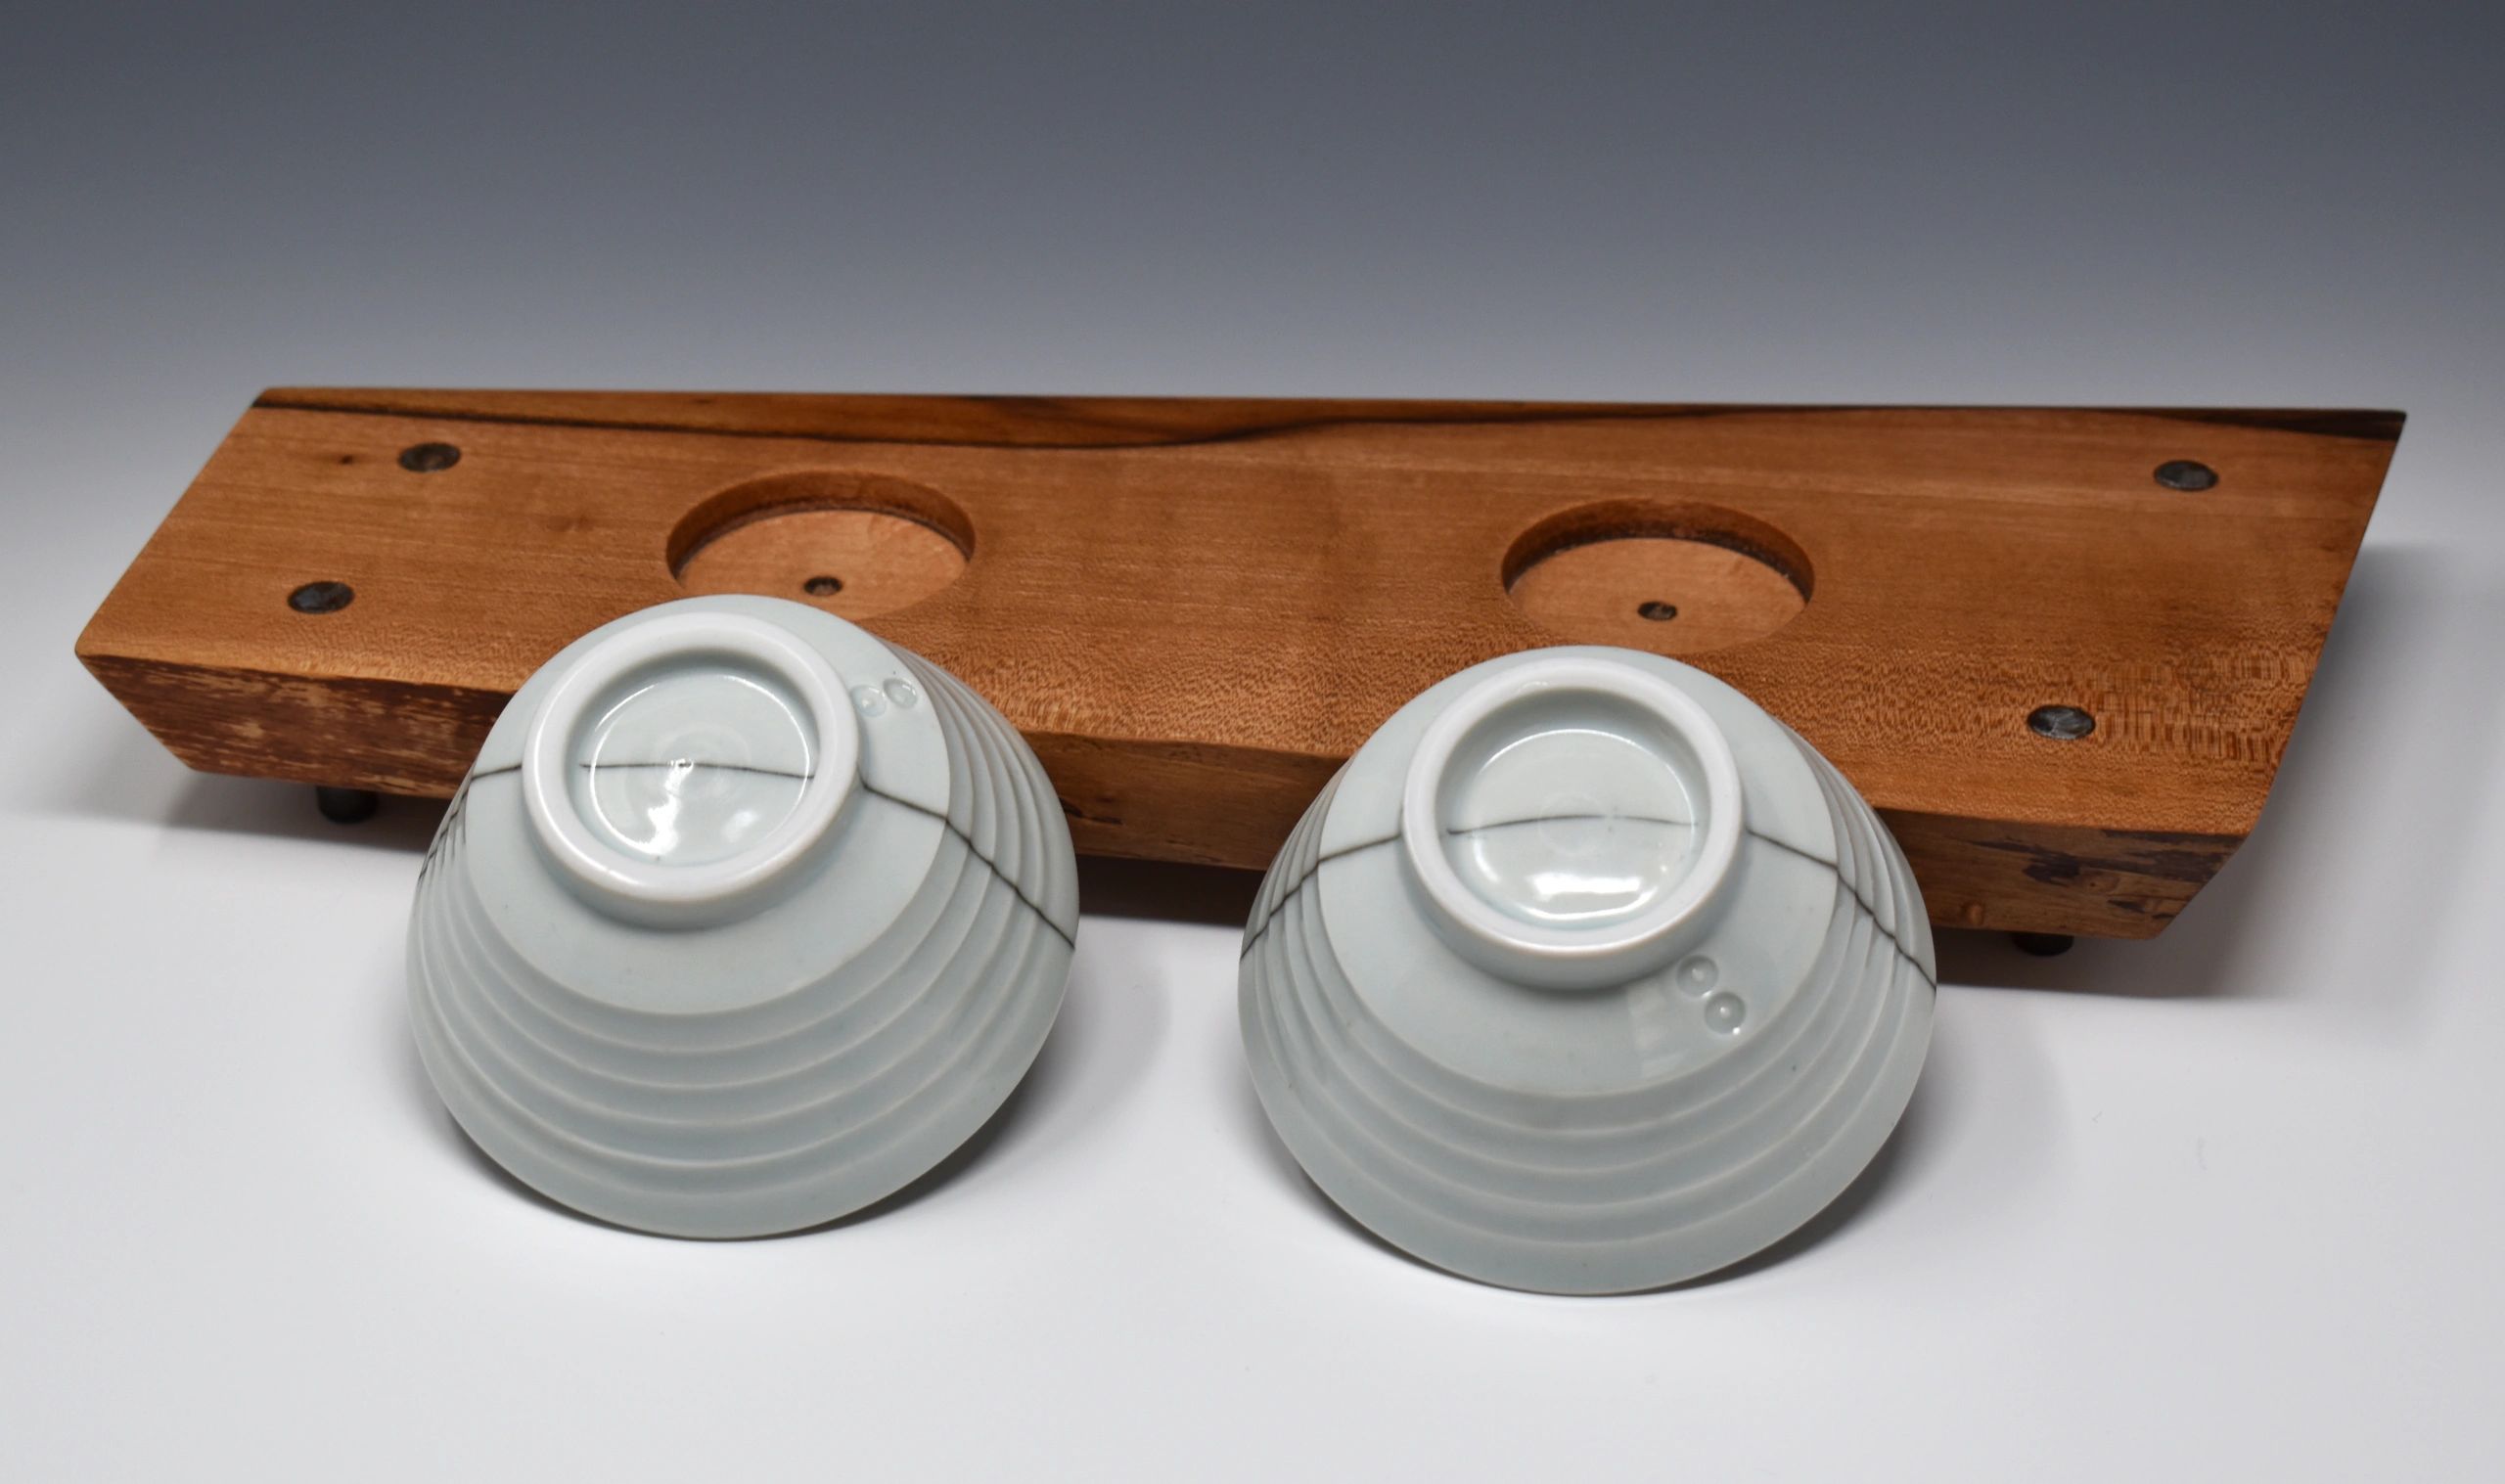 Two porcelain copitas upside down leaning against a wood tray.